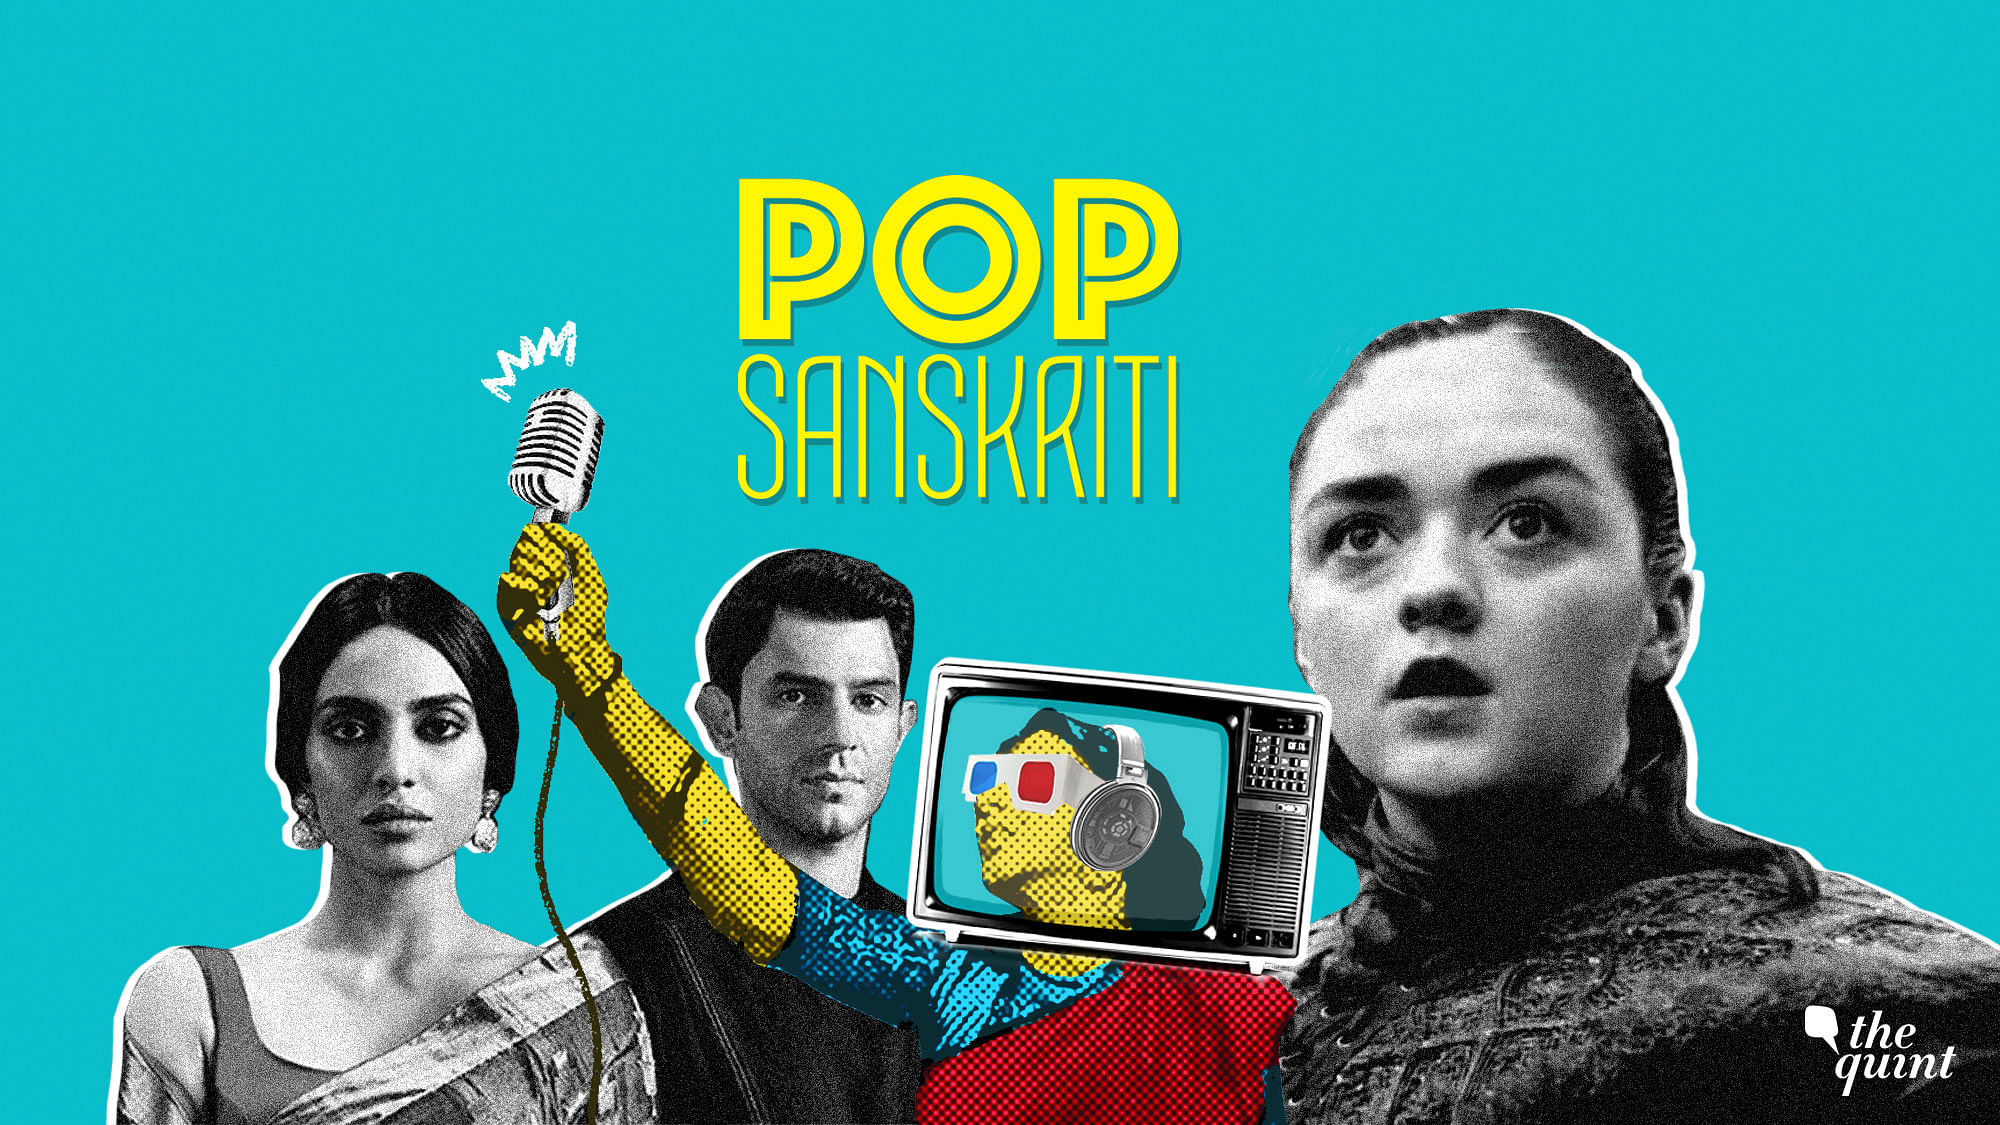 In the fourth episode of The Quint’s pop culture podcast, we talk GoT trailer, “Made in Heaven” &amp; Captain Marvel.&nbsp;